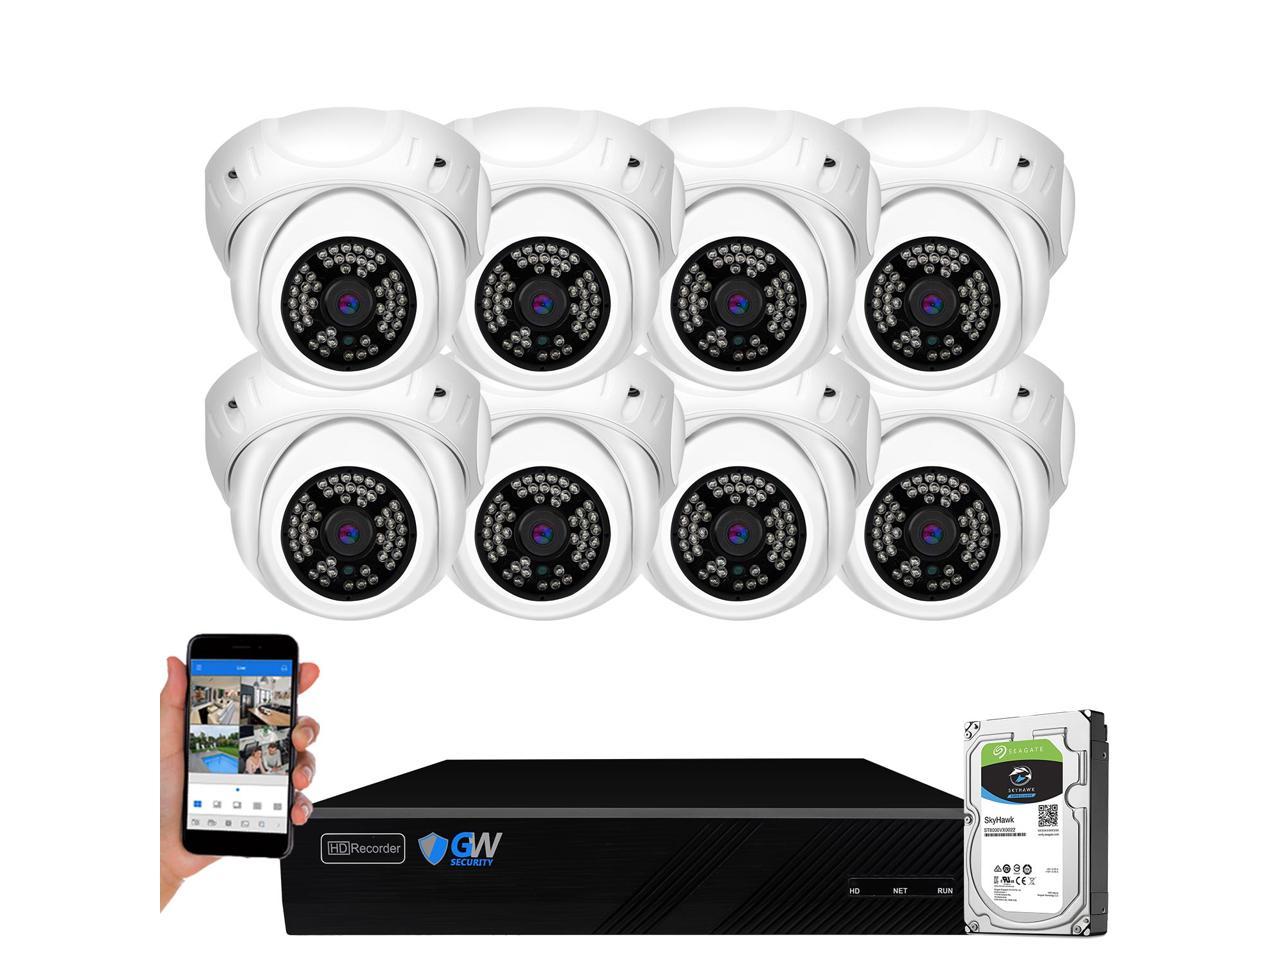 GW Security 8 Channel 5MP H.265 NVR IP Camera Network PoE Video & Audio Surveillance System (2TB HDD), 8 x HD 1920P Weatherproof Microphone Turret Security Cameras, AI Human Detection